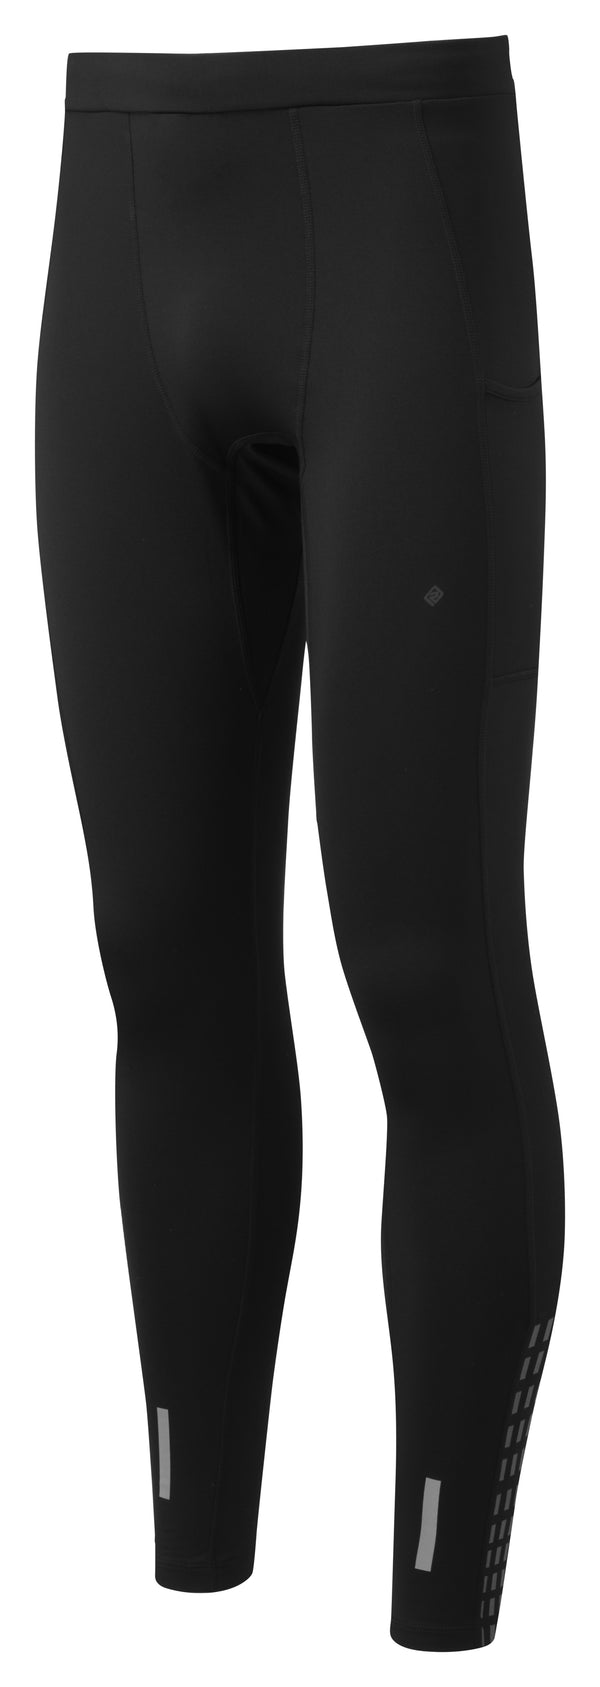 RonHill | Men's Tech Afterhours Tight | Black/Charcoal/Rflct | S